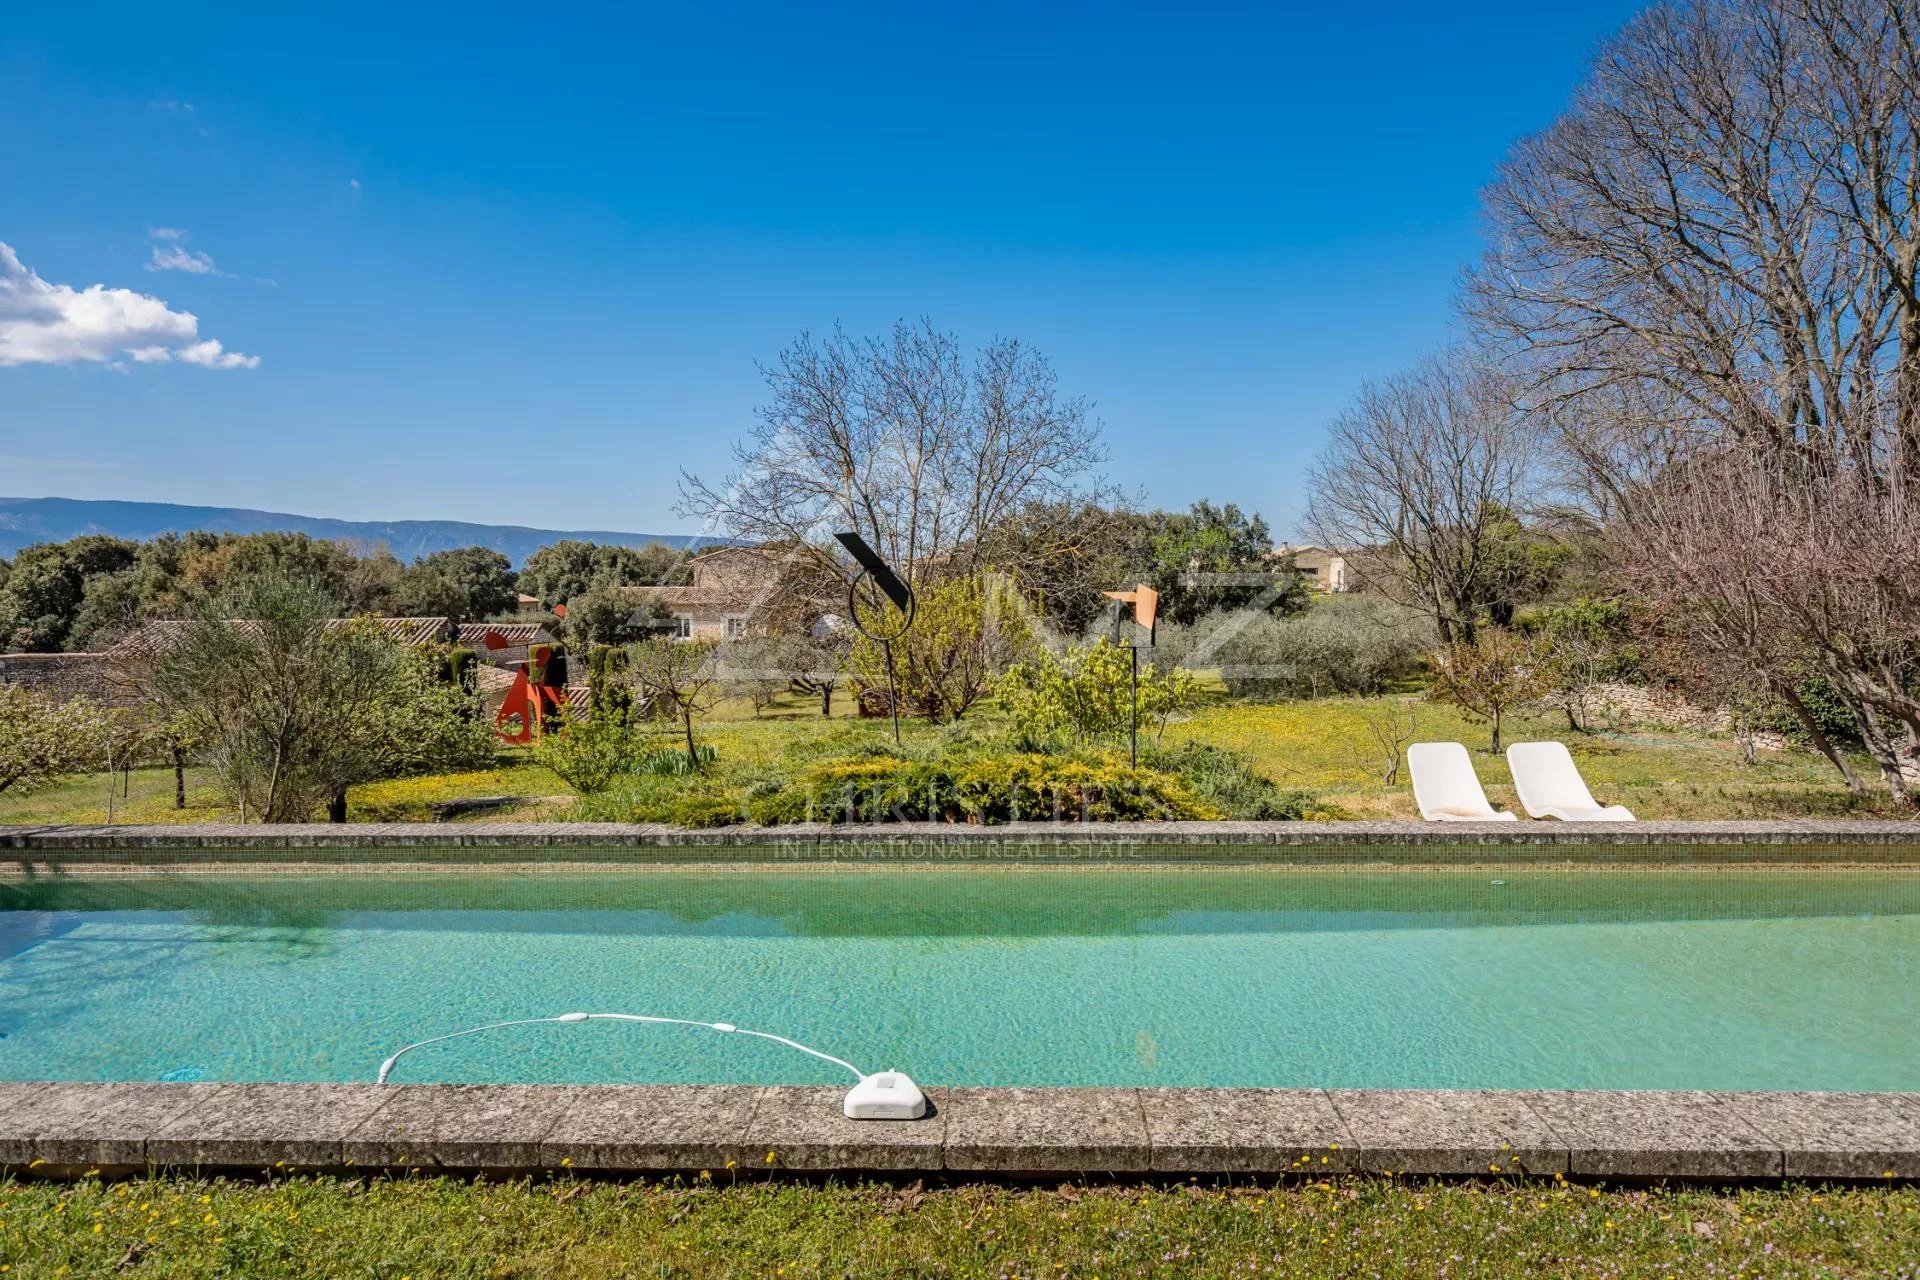 Close to Gordes - Beautiful house with clear view